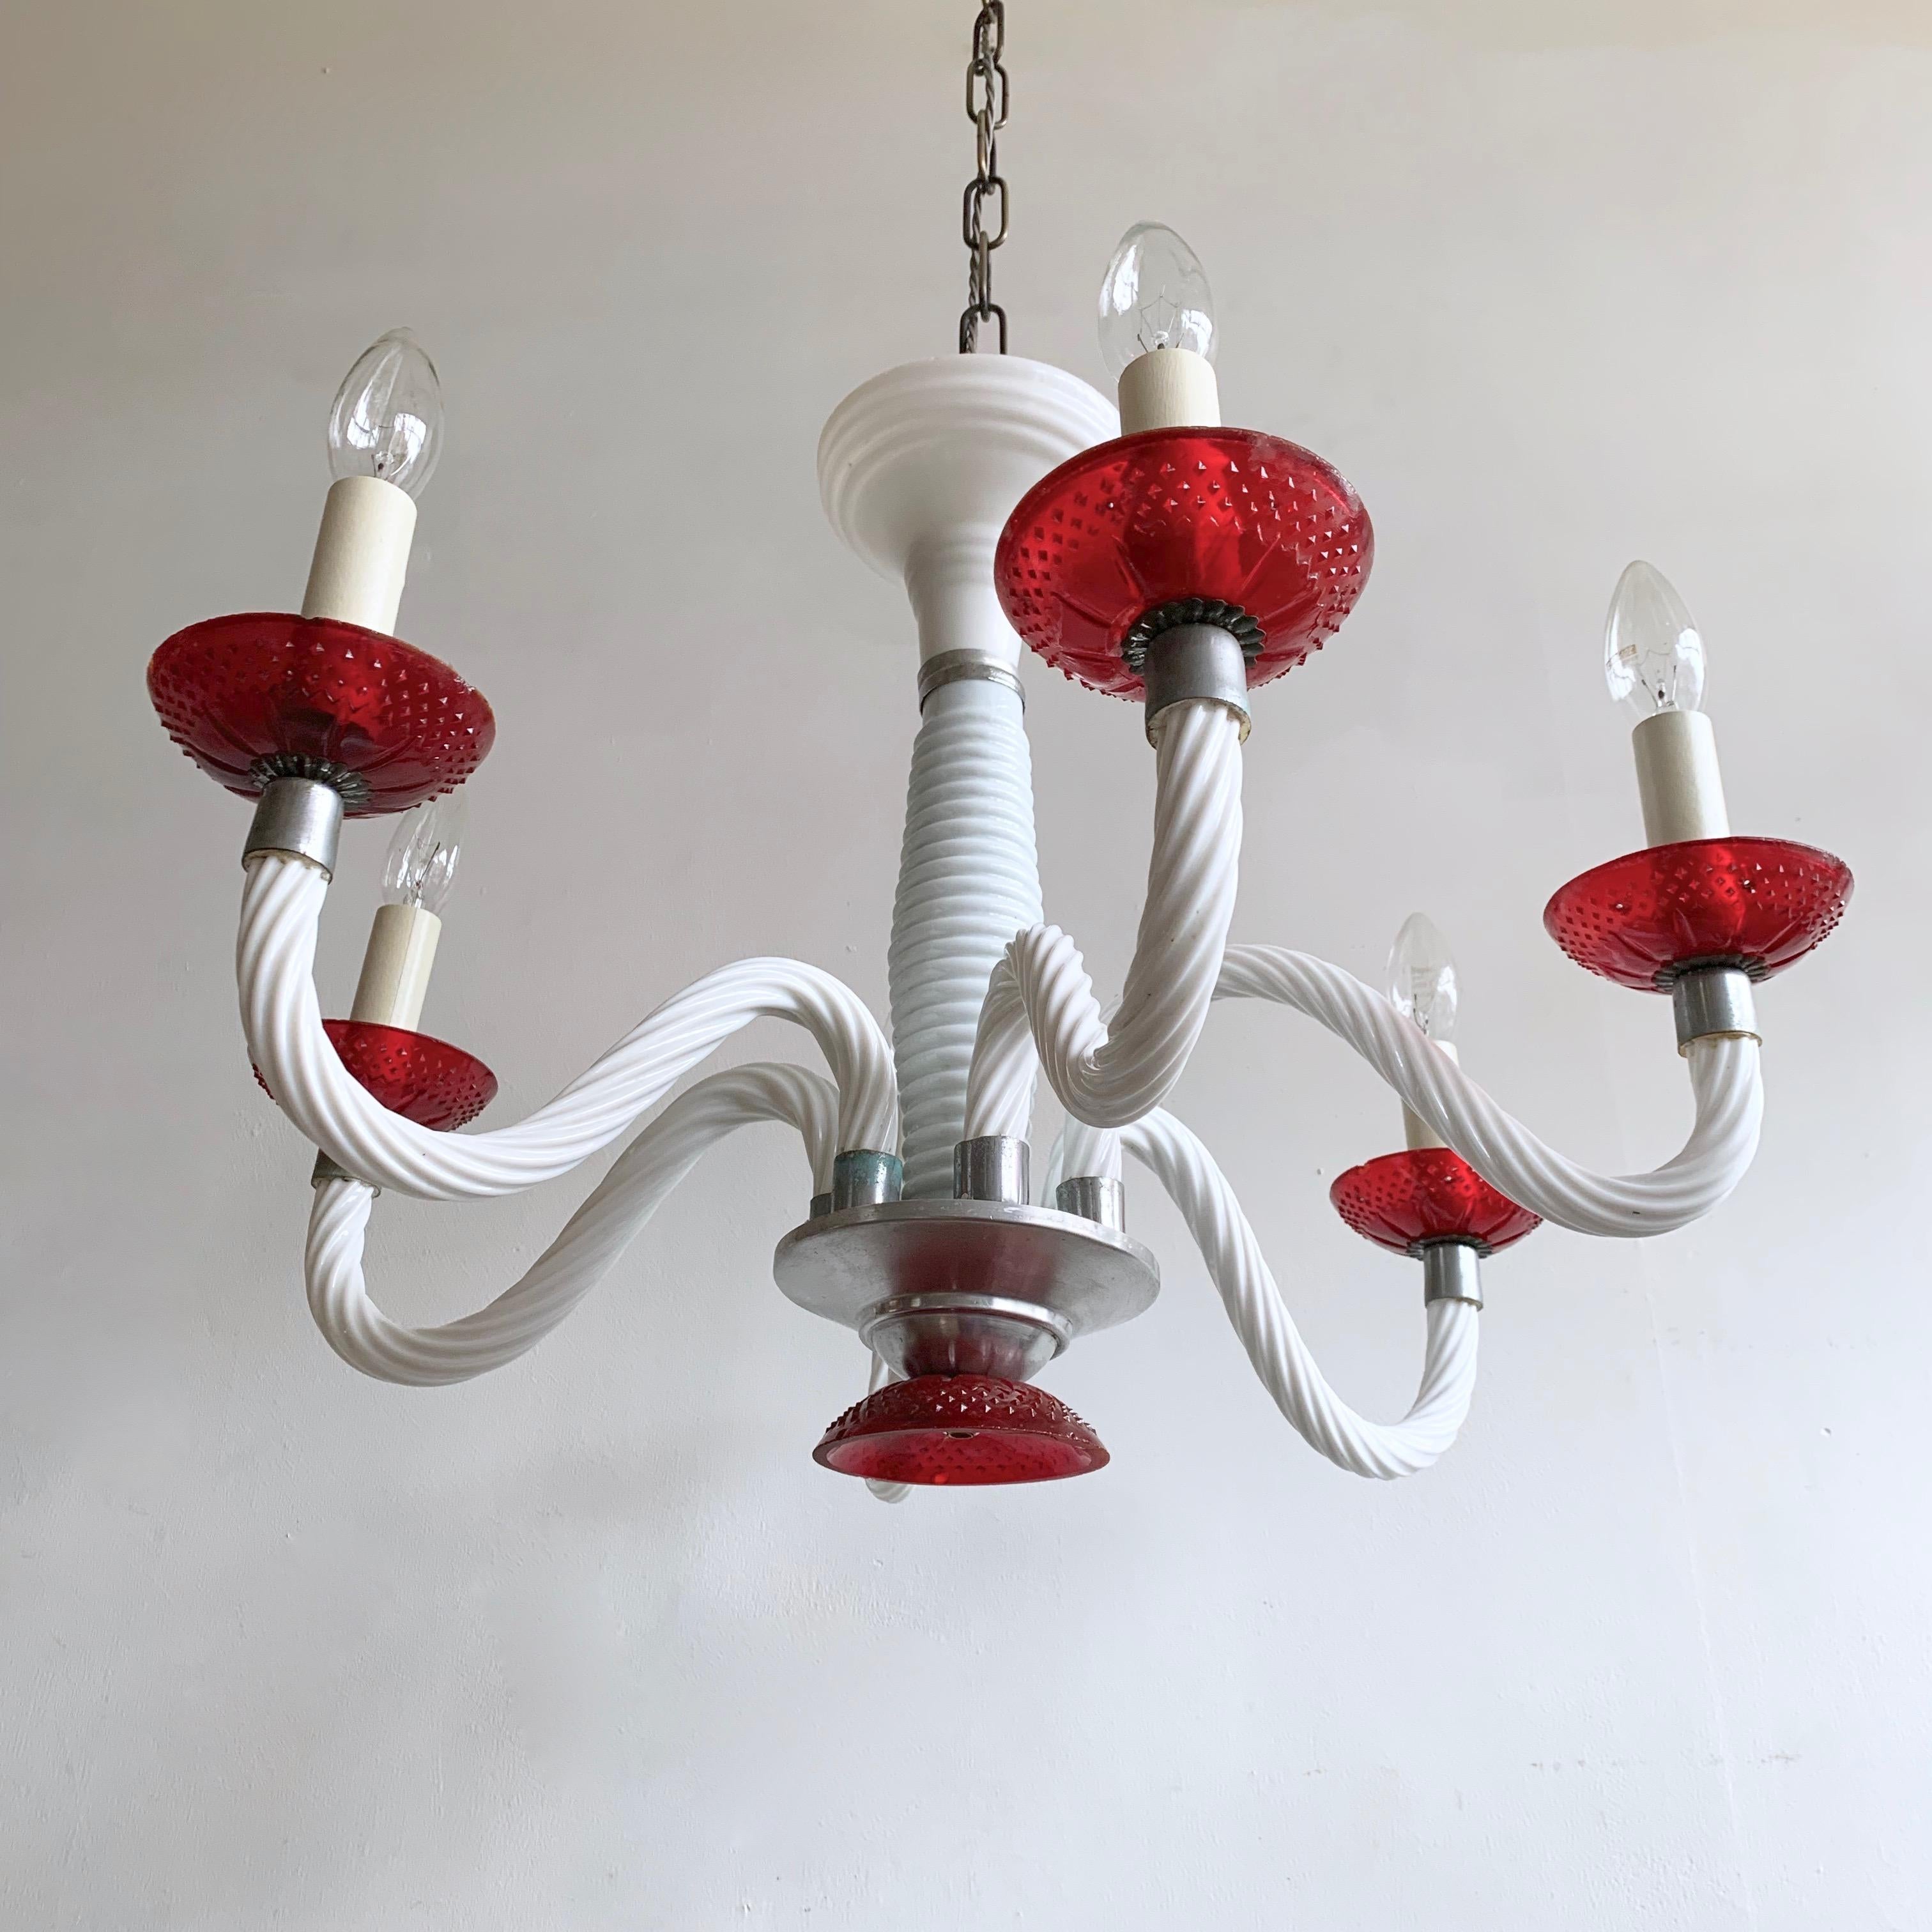 Early 1900s White Glass Swan Neck Chandelier with Red Bobéche Pans In Good Condition For Sale In Stockport, GB